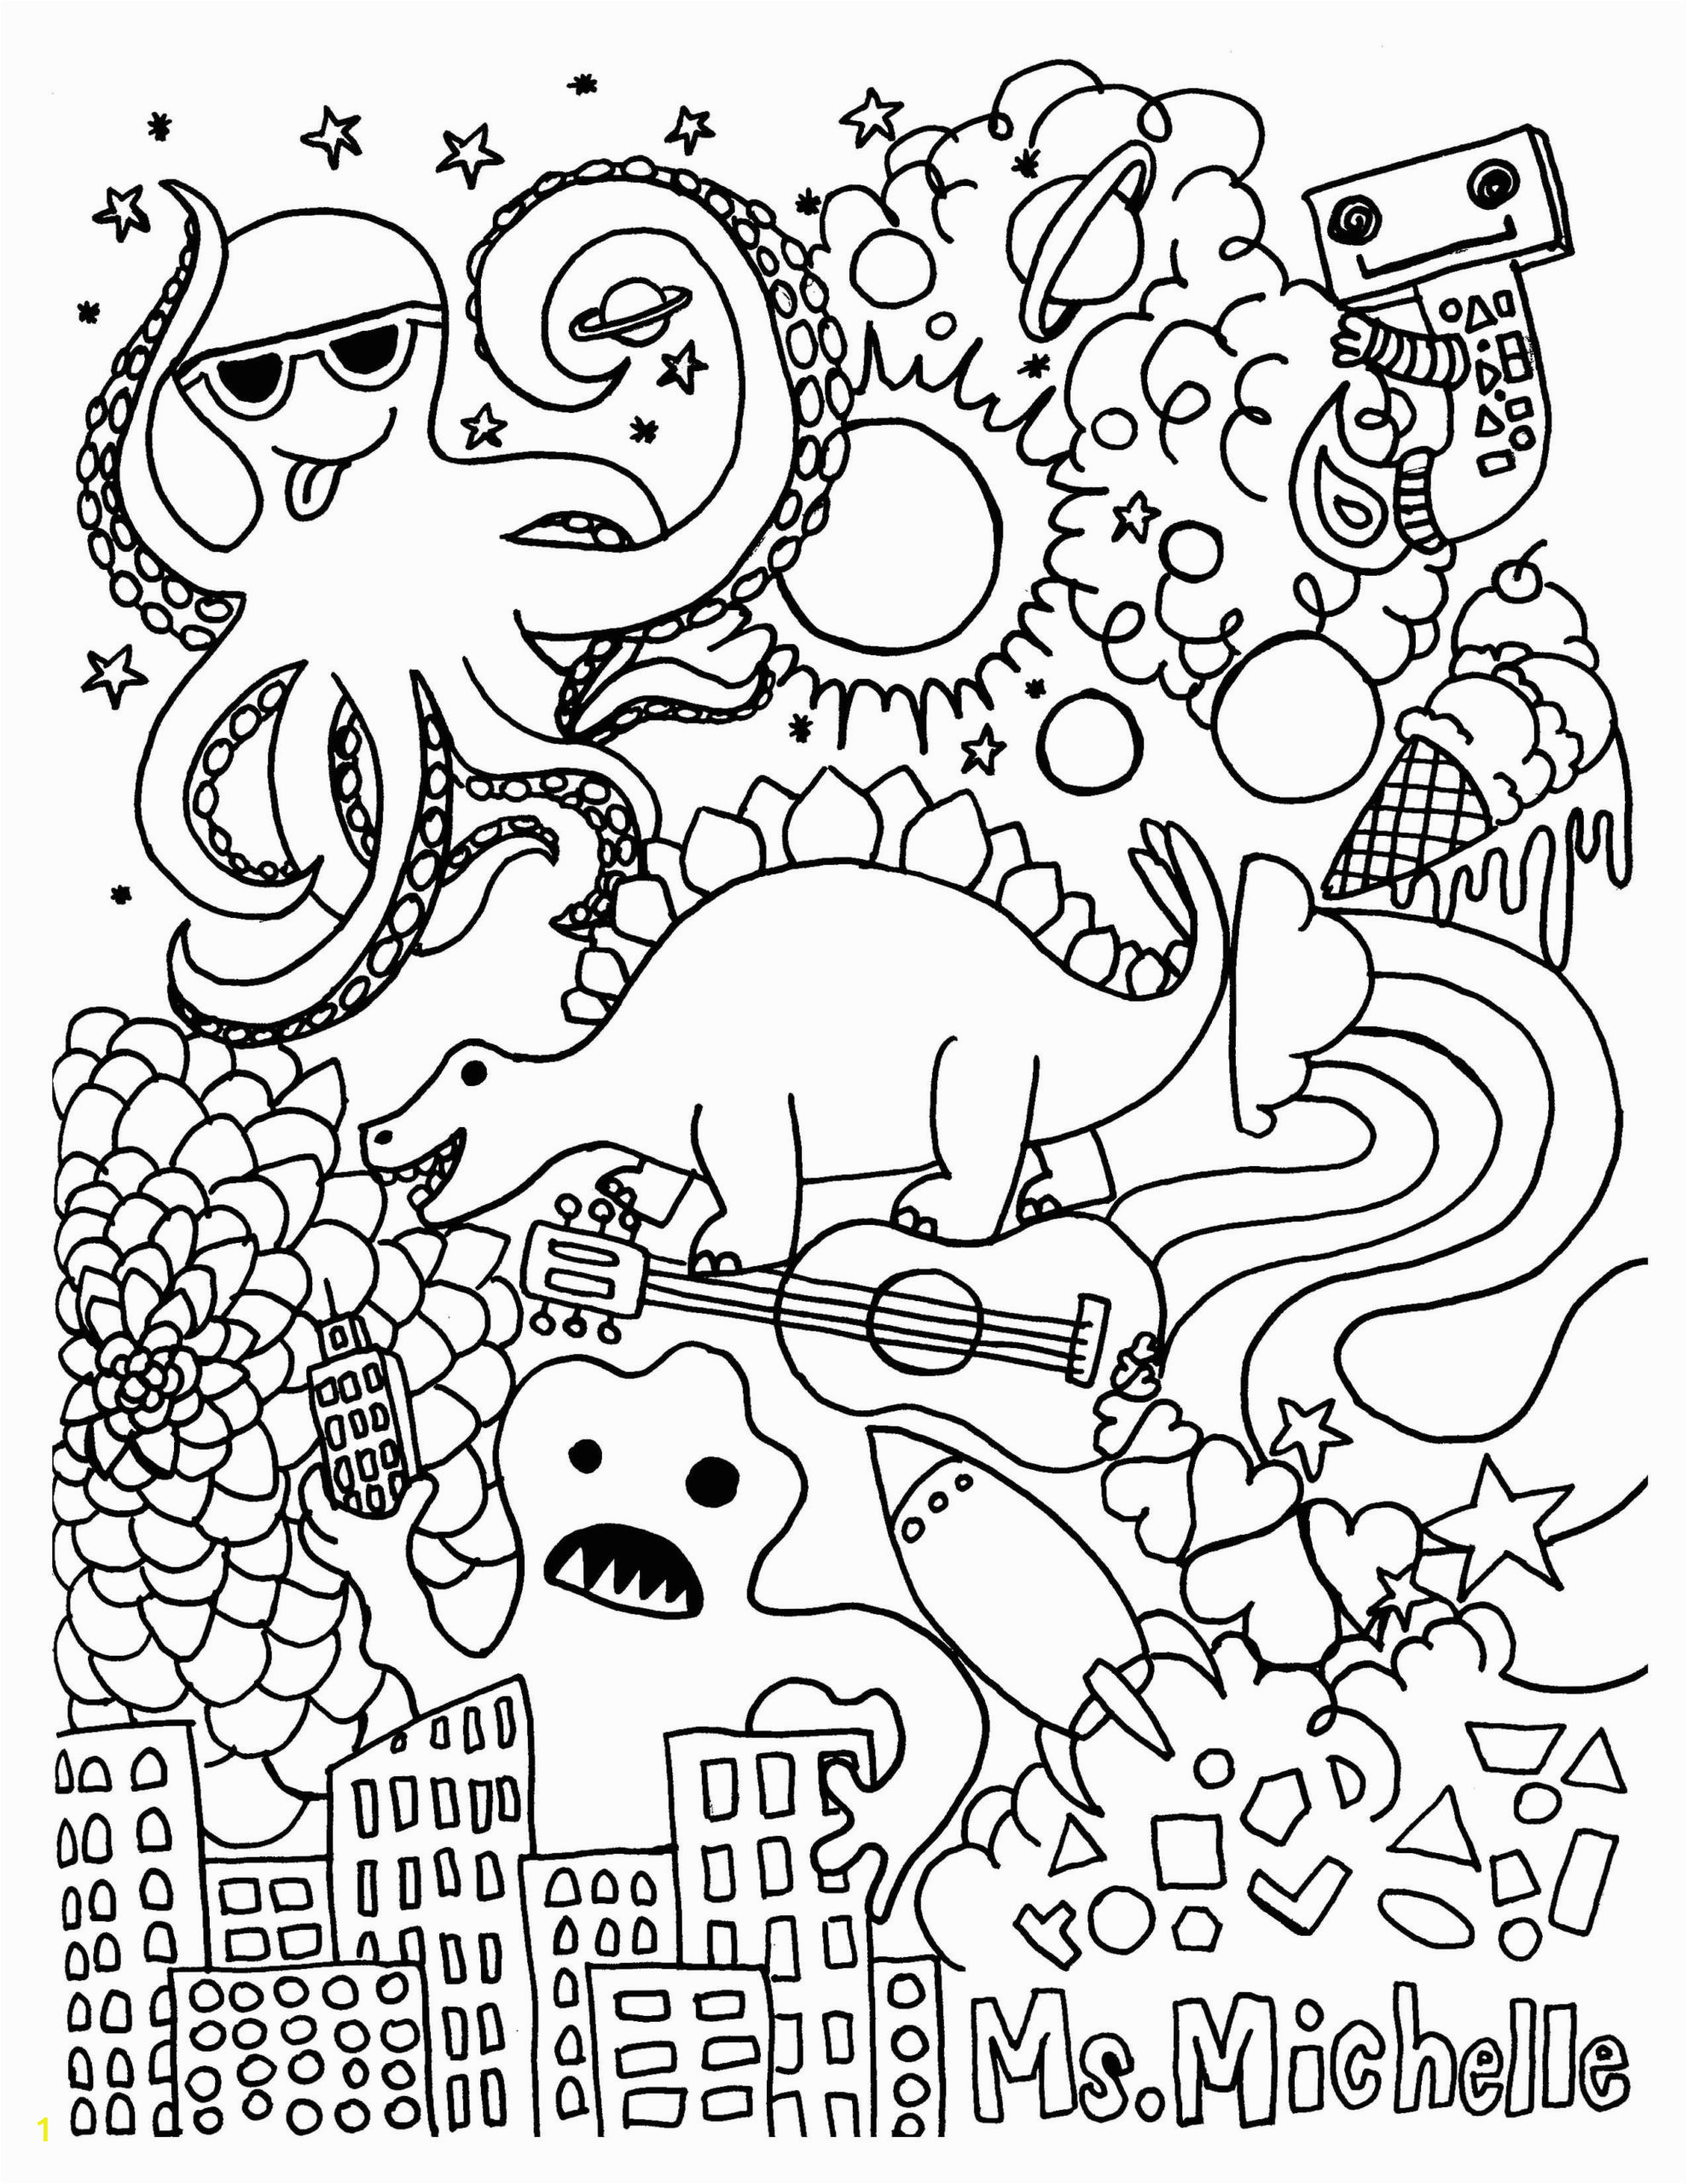 Easy Halloween Coloring Pages for Kids Coloring Books Love You Adult Coloring Pages Celtic